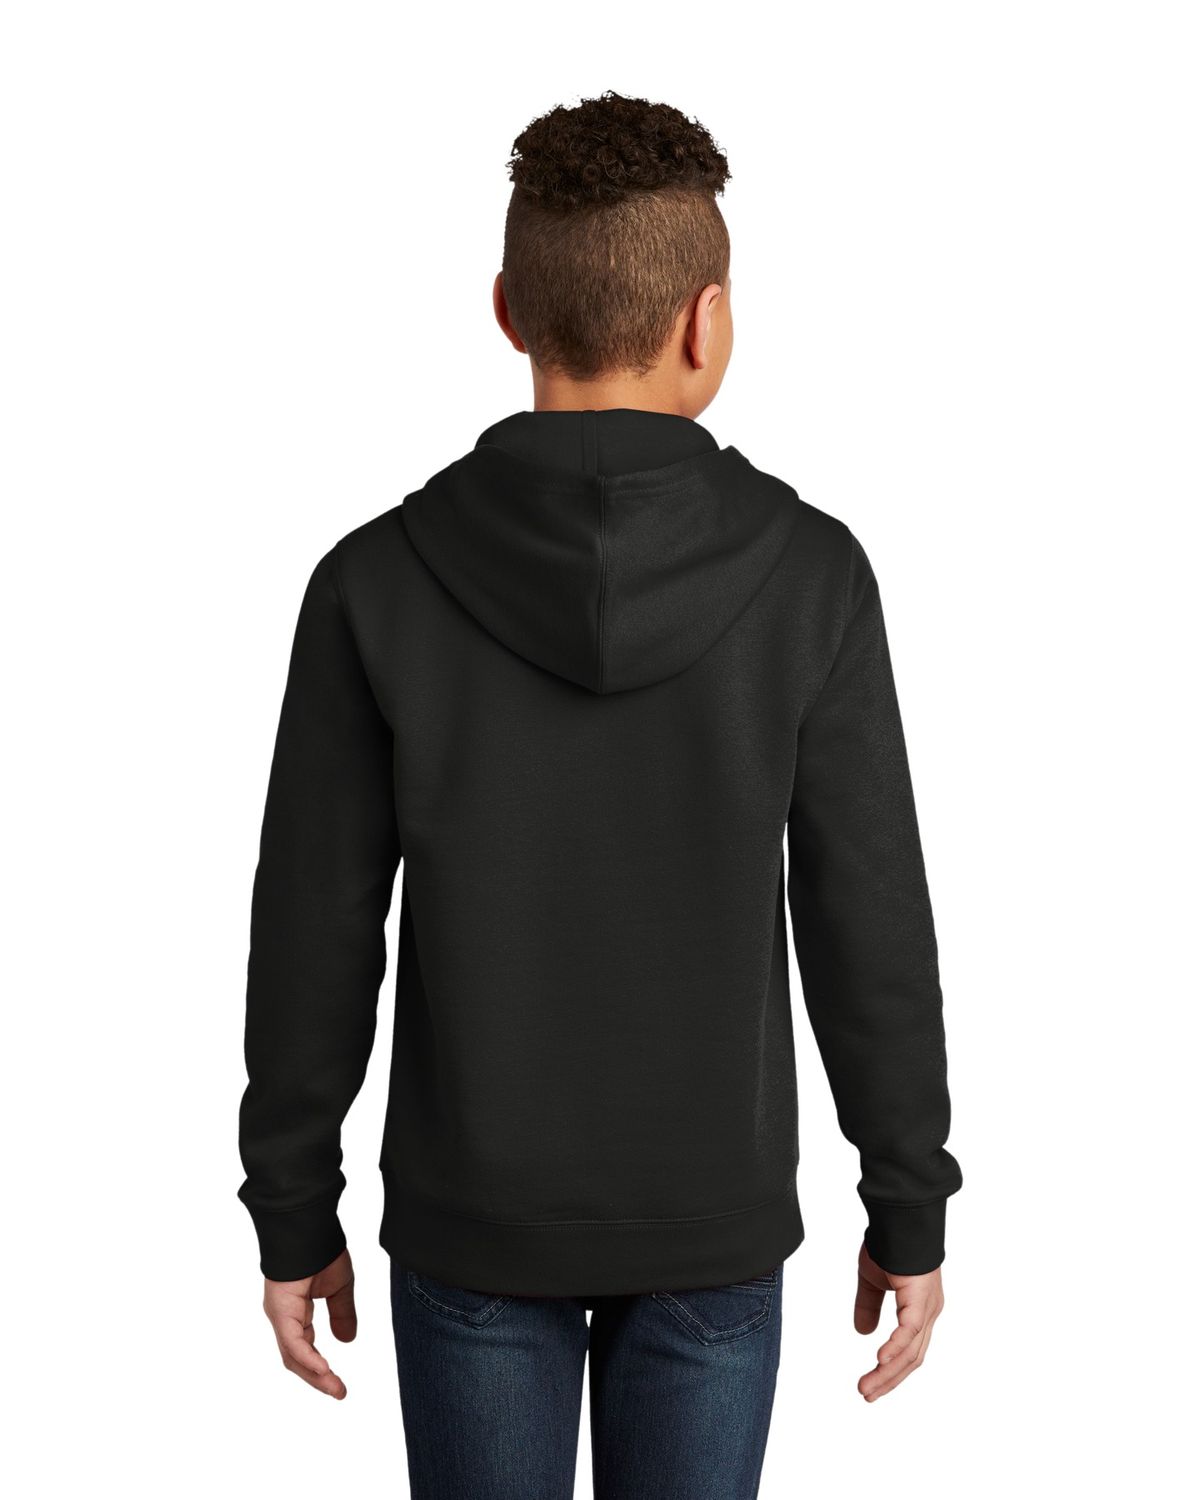 'District DT6100Y Youth V.I.T. Fleece Hoodie'